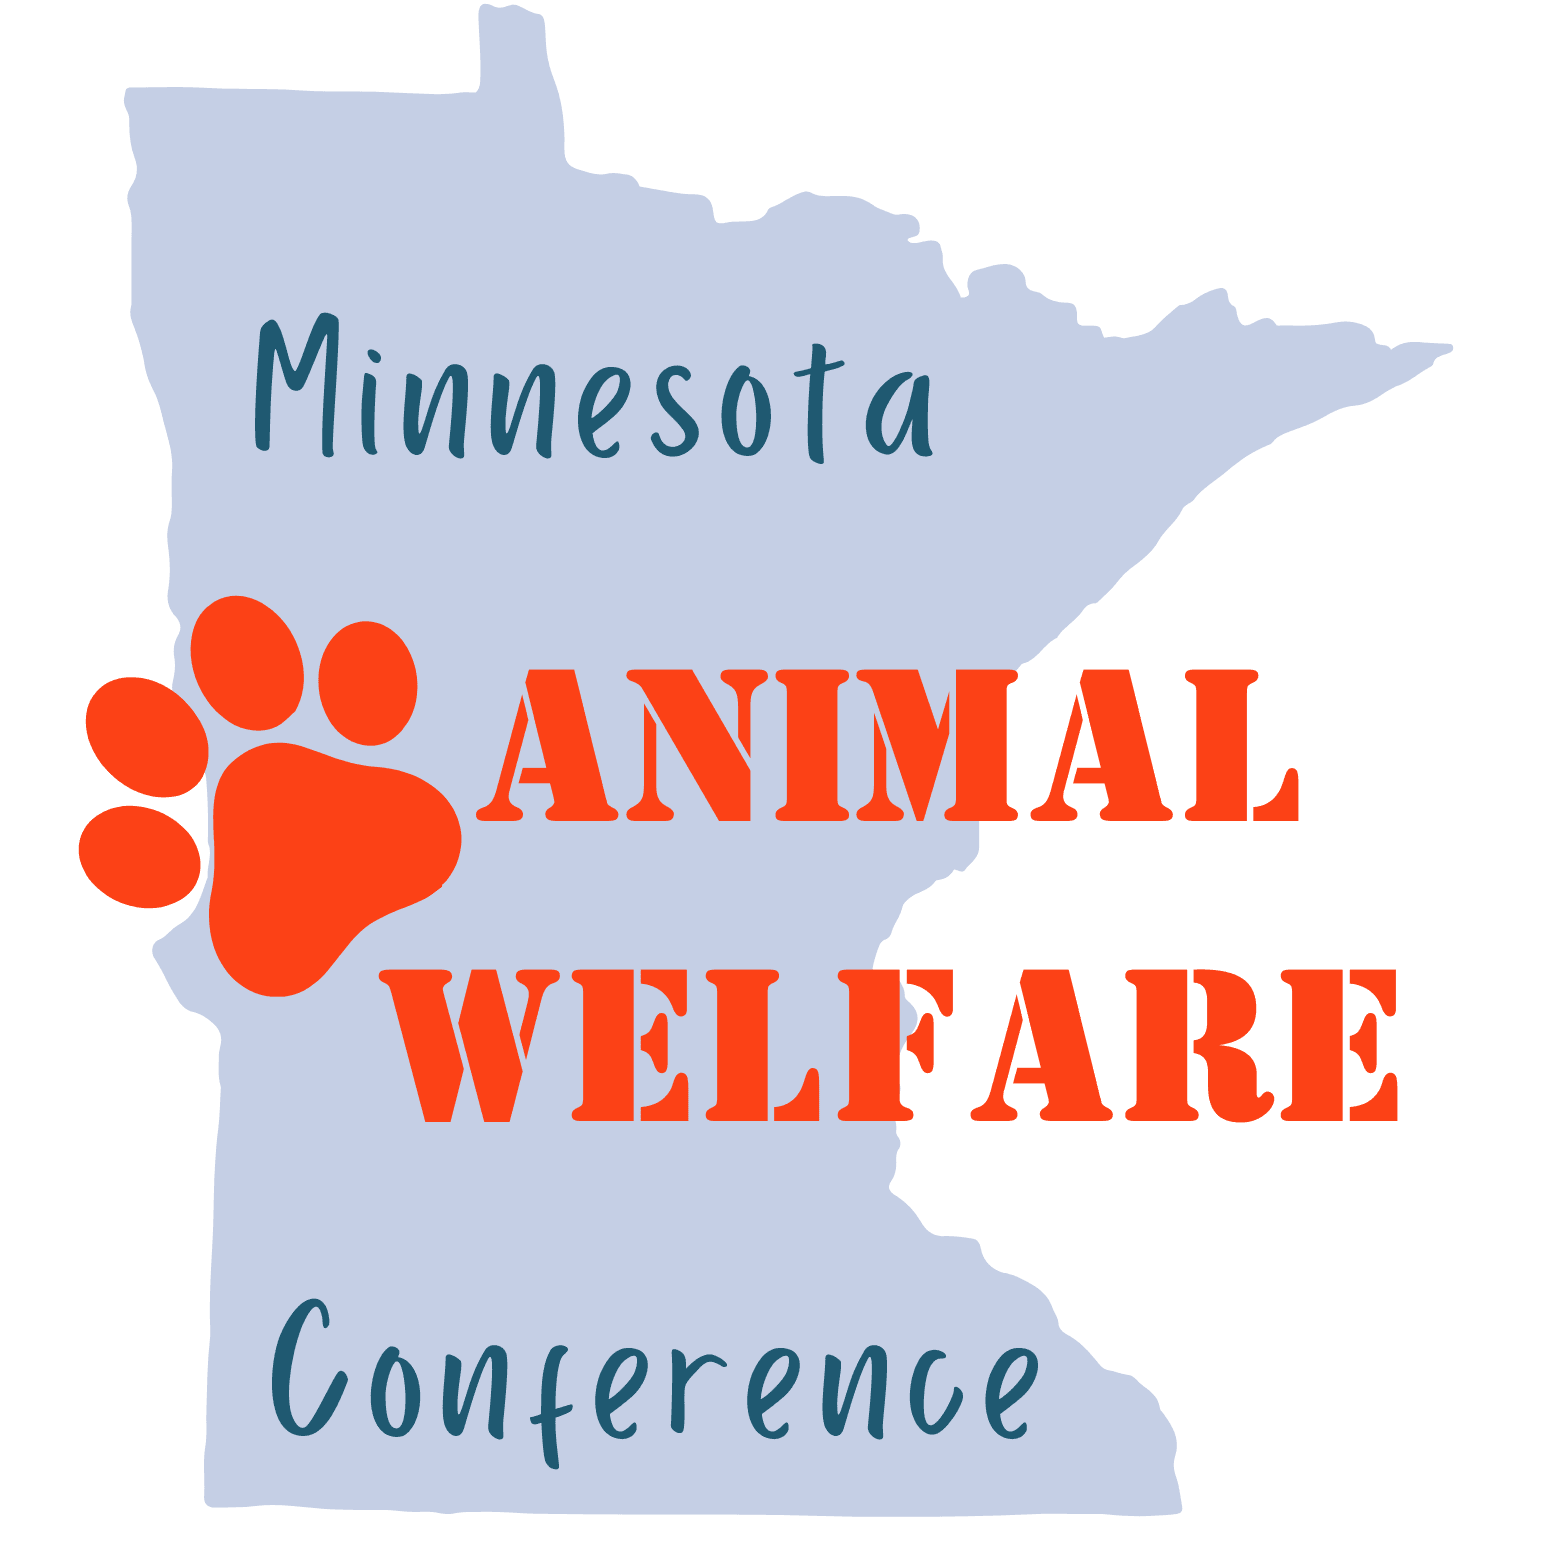 Save the Date for the Minnesota Animal Welfare Conference!